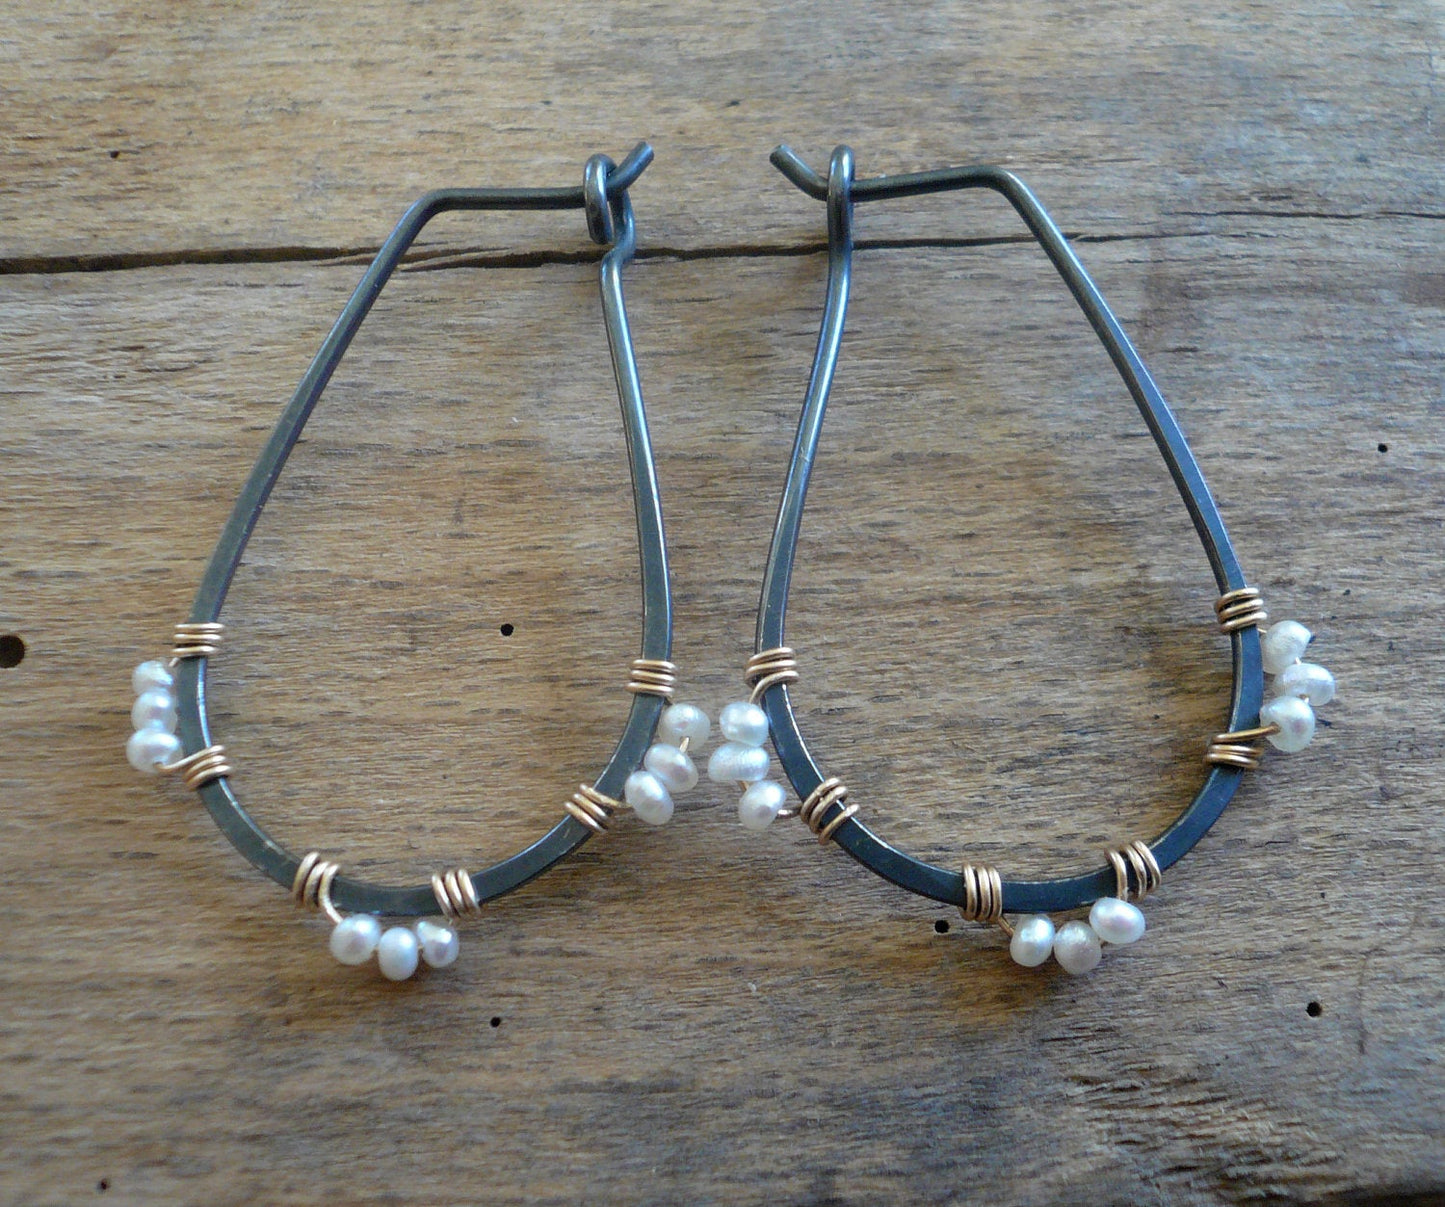 Medley Collection Hoops - Handmade. Hand forged. Seed Pearls. 14kt Goldfill. Heavily Oxidized Sterling Silver Earrings